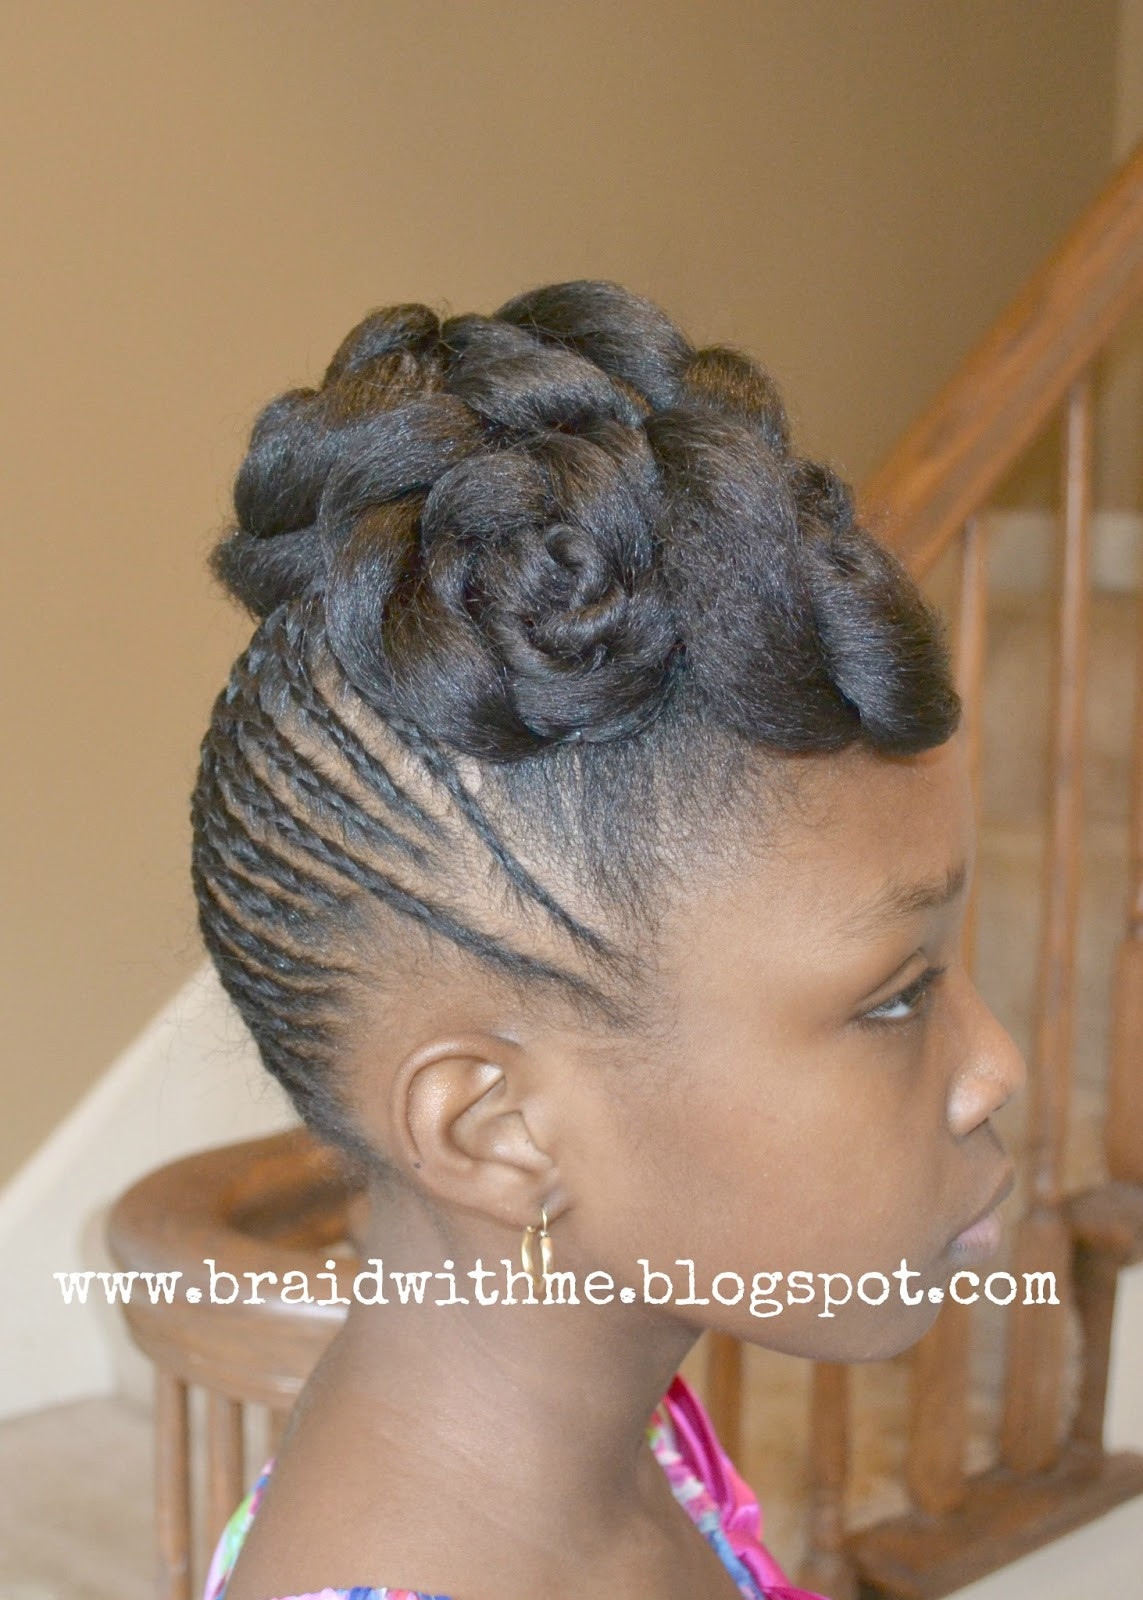 Little Black Girl Updo Hairstyles
 Beads Braids and Beyond Easter Updo for Little Girls